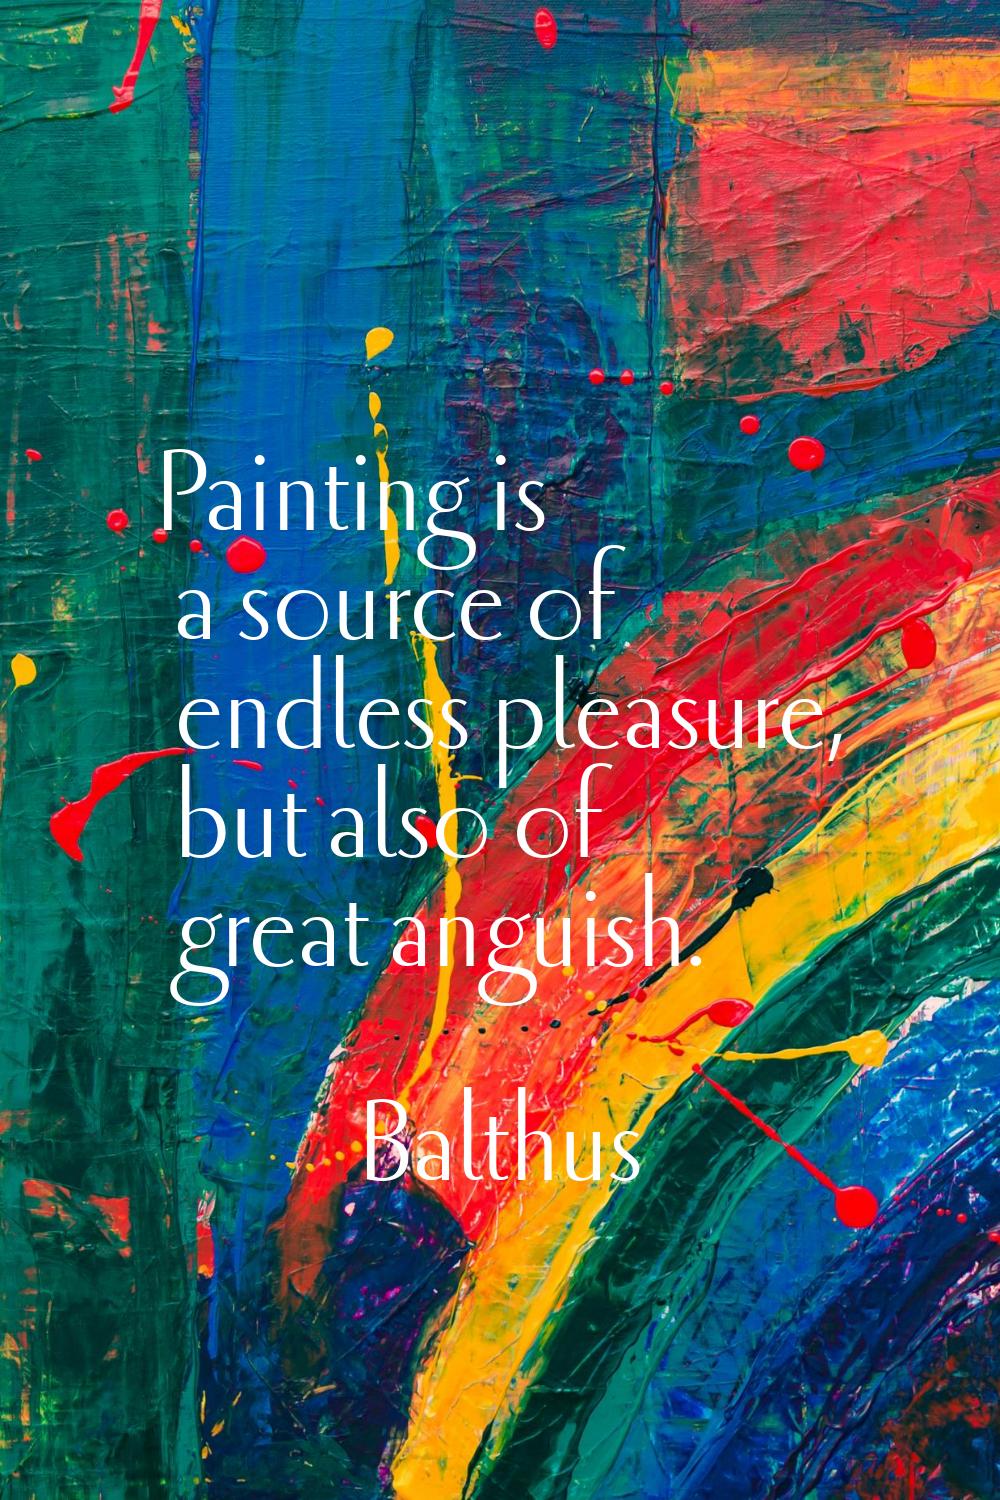 Painting is a source of endless pleasure, but also of great anguish.